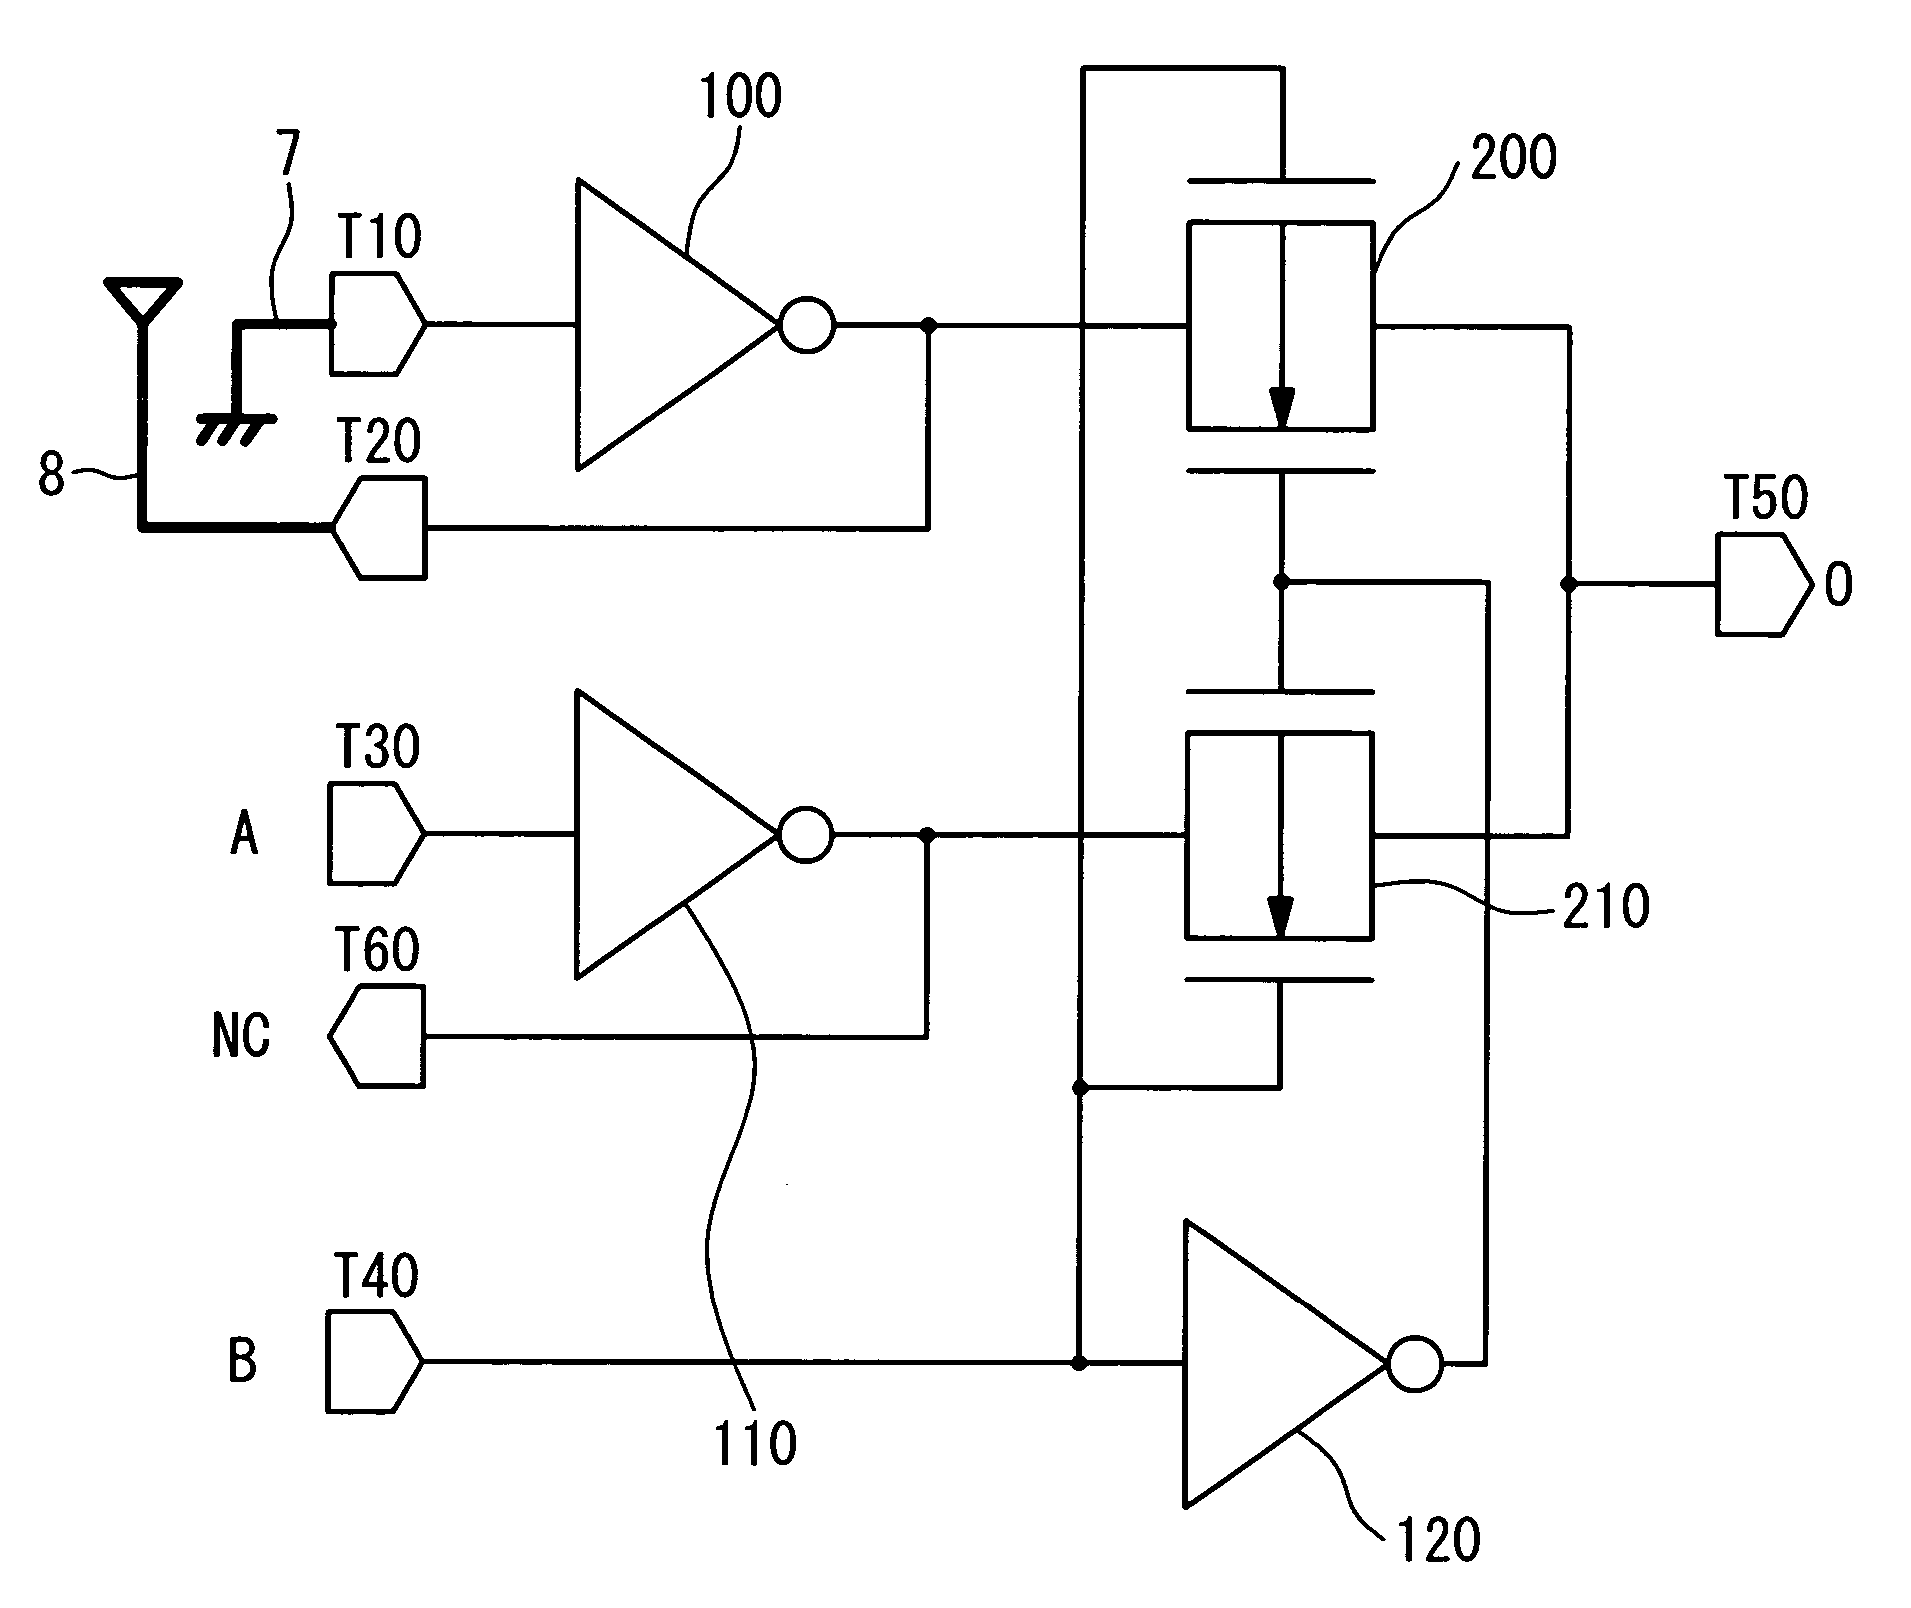 Semiconductor device having universal logic cell